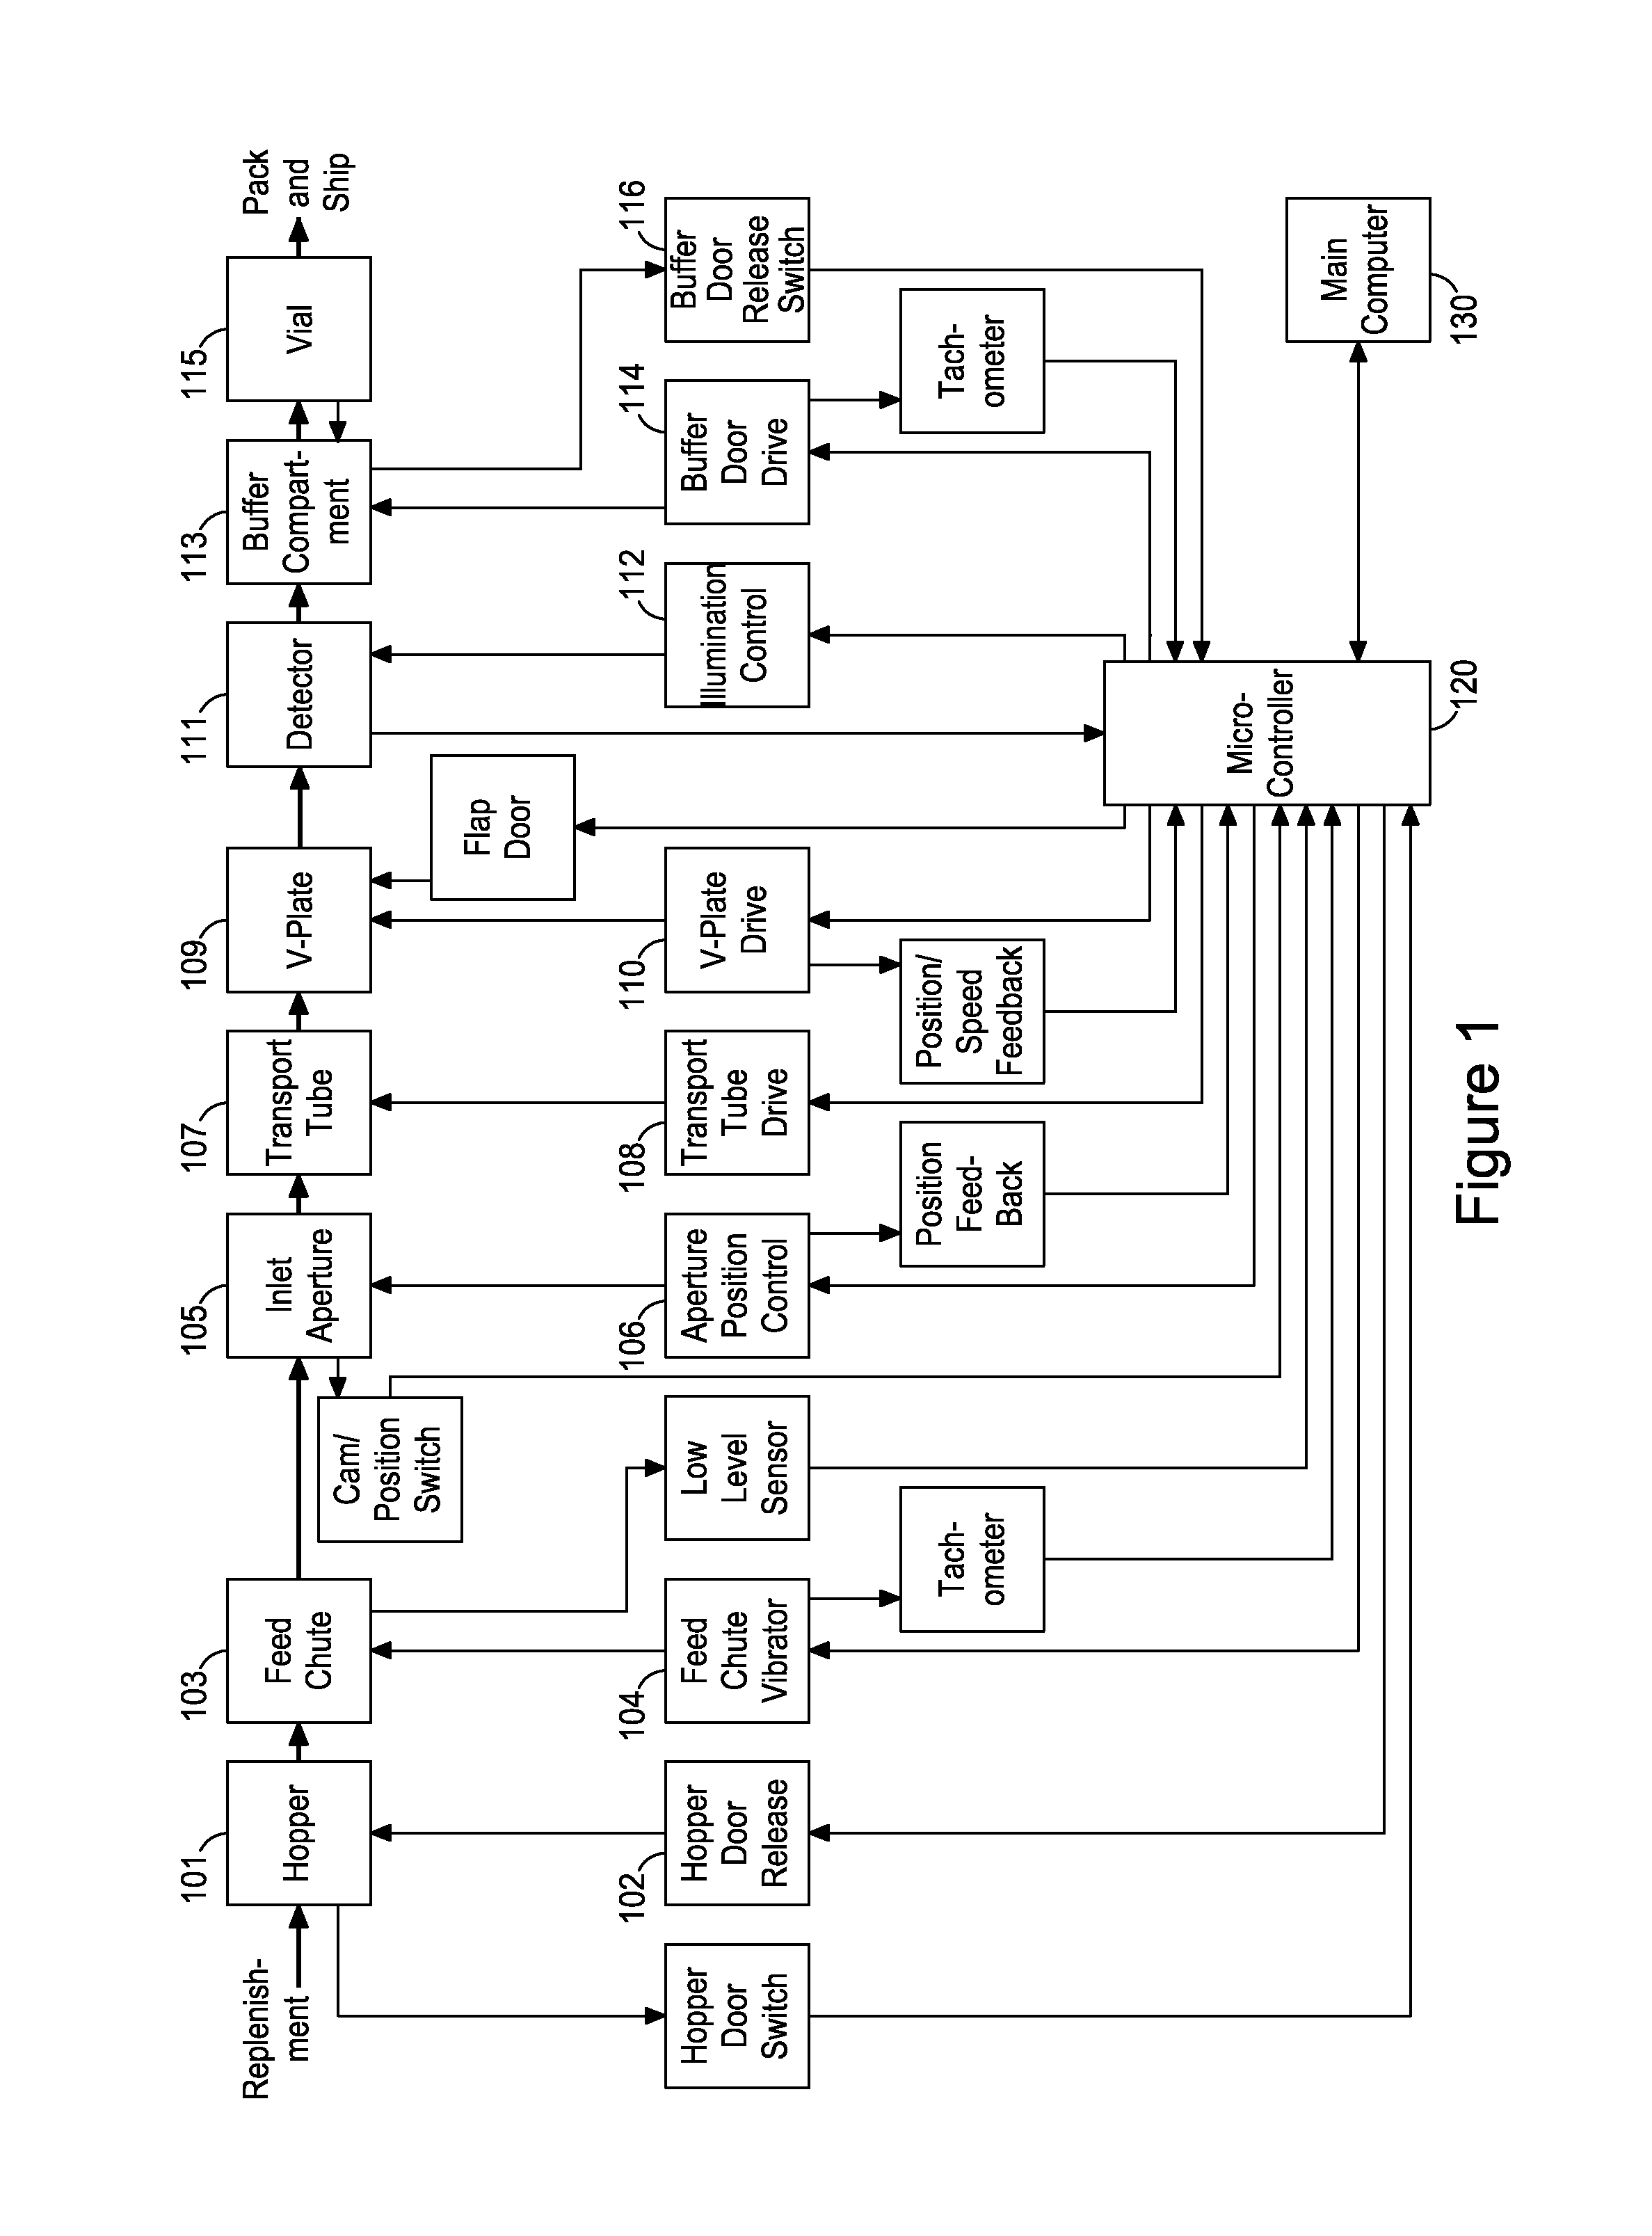 Pill counting and dispensing apparatus with self-calibrating dispenser